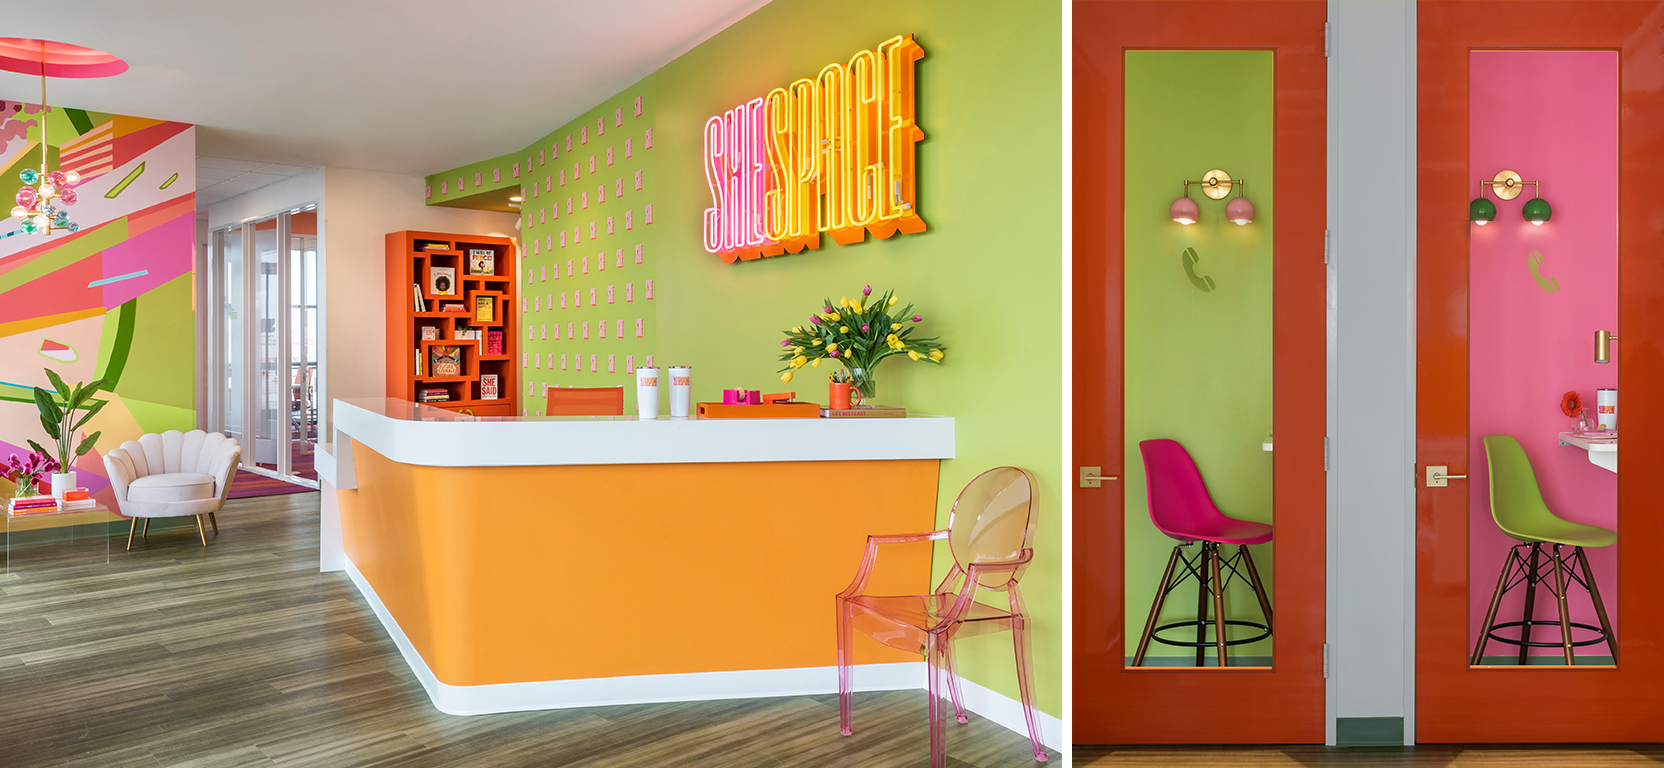 Left image: Bright and colorful coworking lobby area with a neon pink and orange sign that says “SheSpace” behind the orange desk. Right image: Pink and green modern “phone booth” areas seen through glass doors, brightly colored sculpted chairs and brightly painted walls.